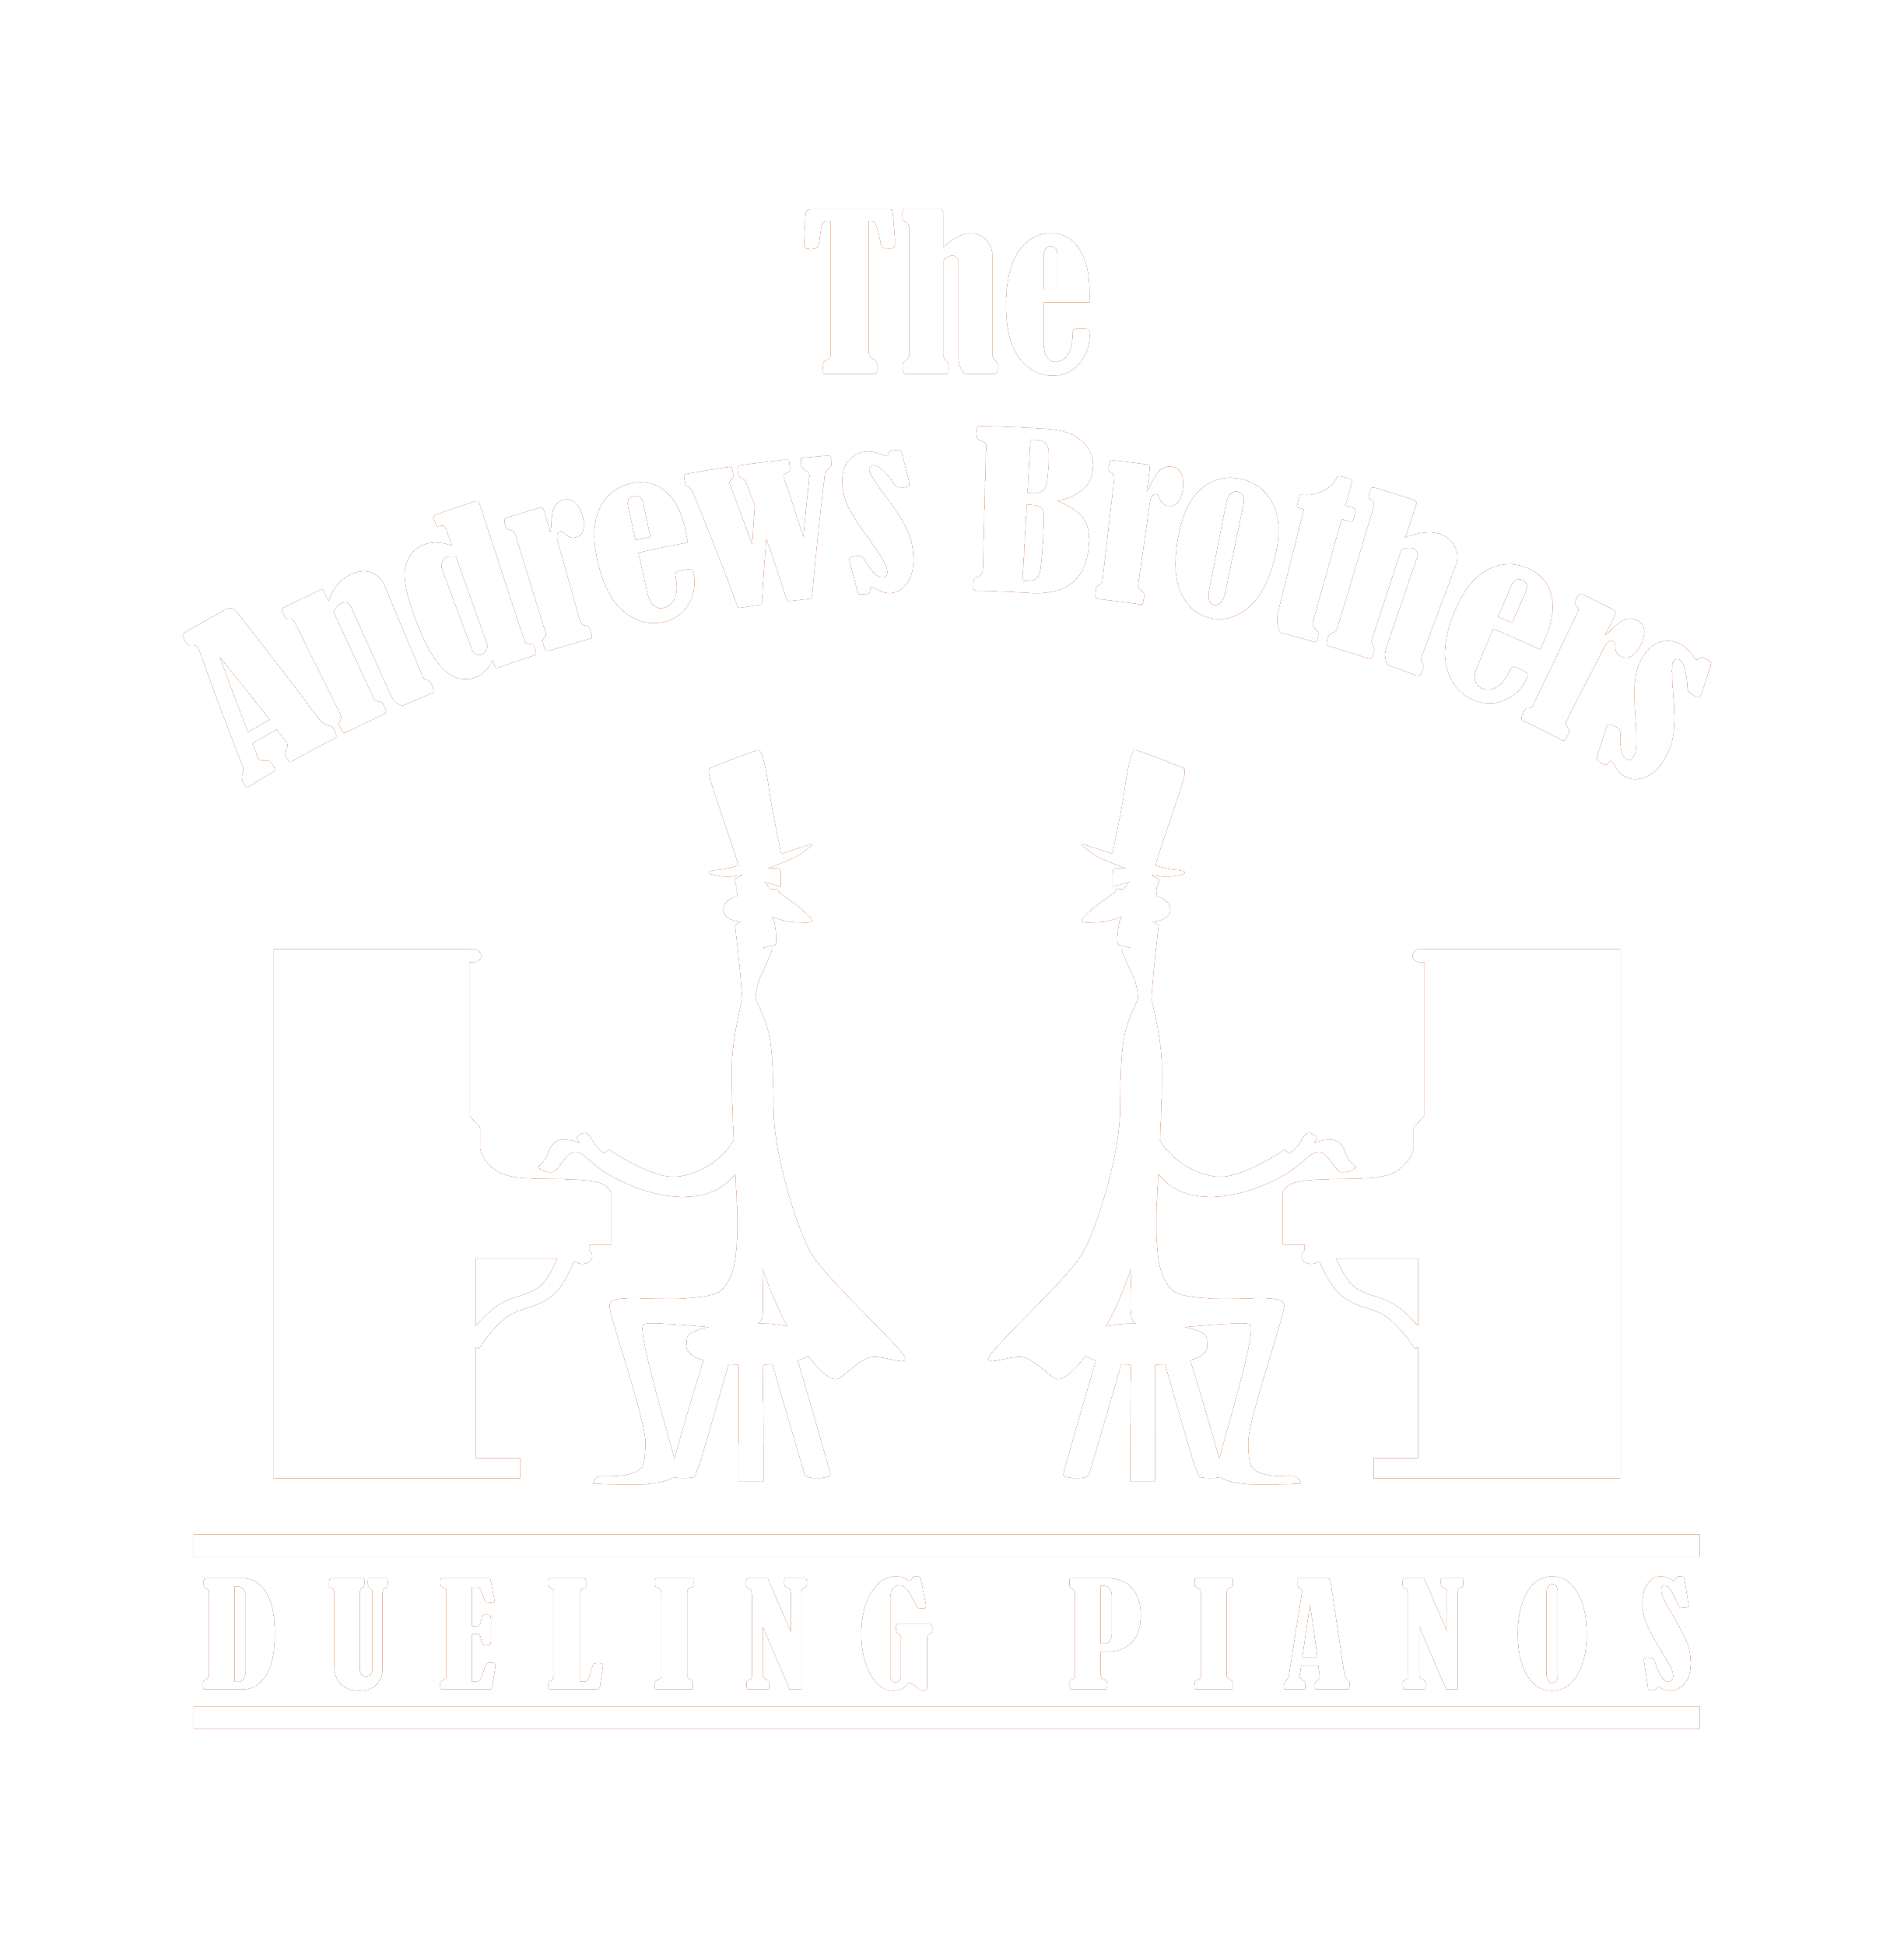 The andrews brothers dueling pianos